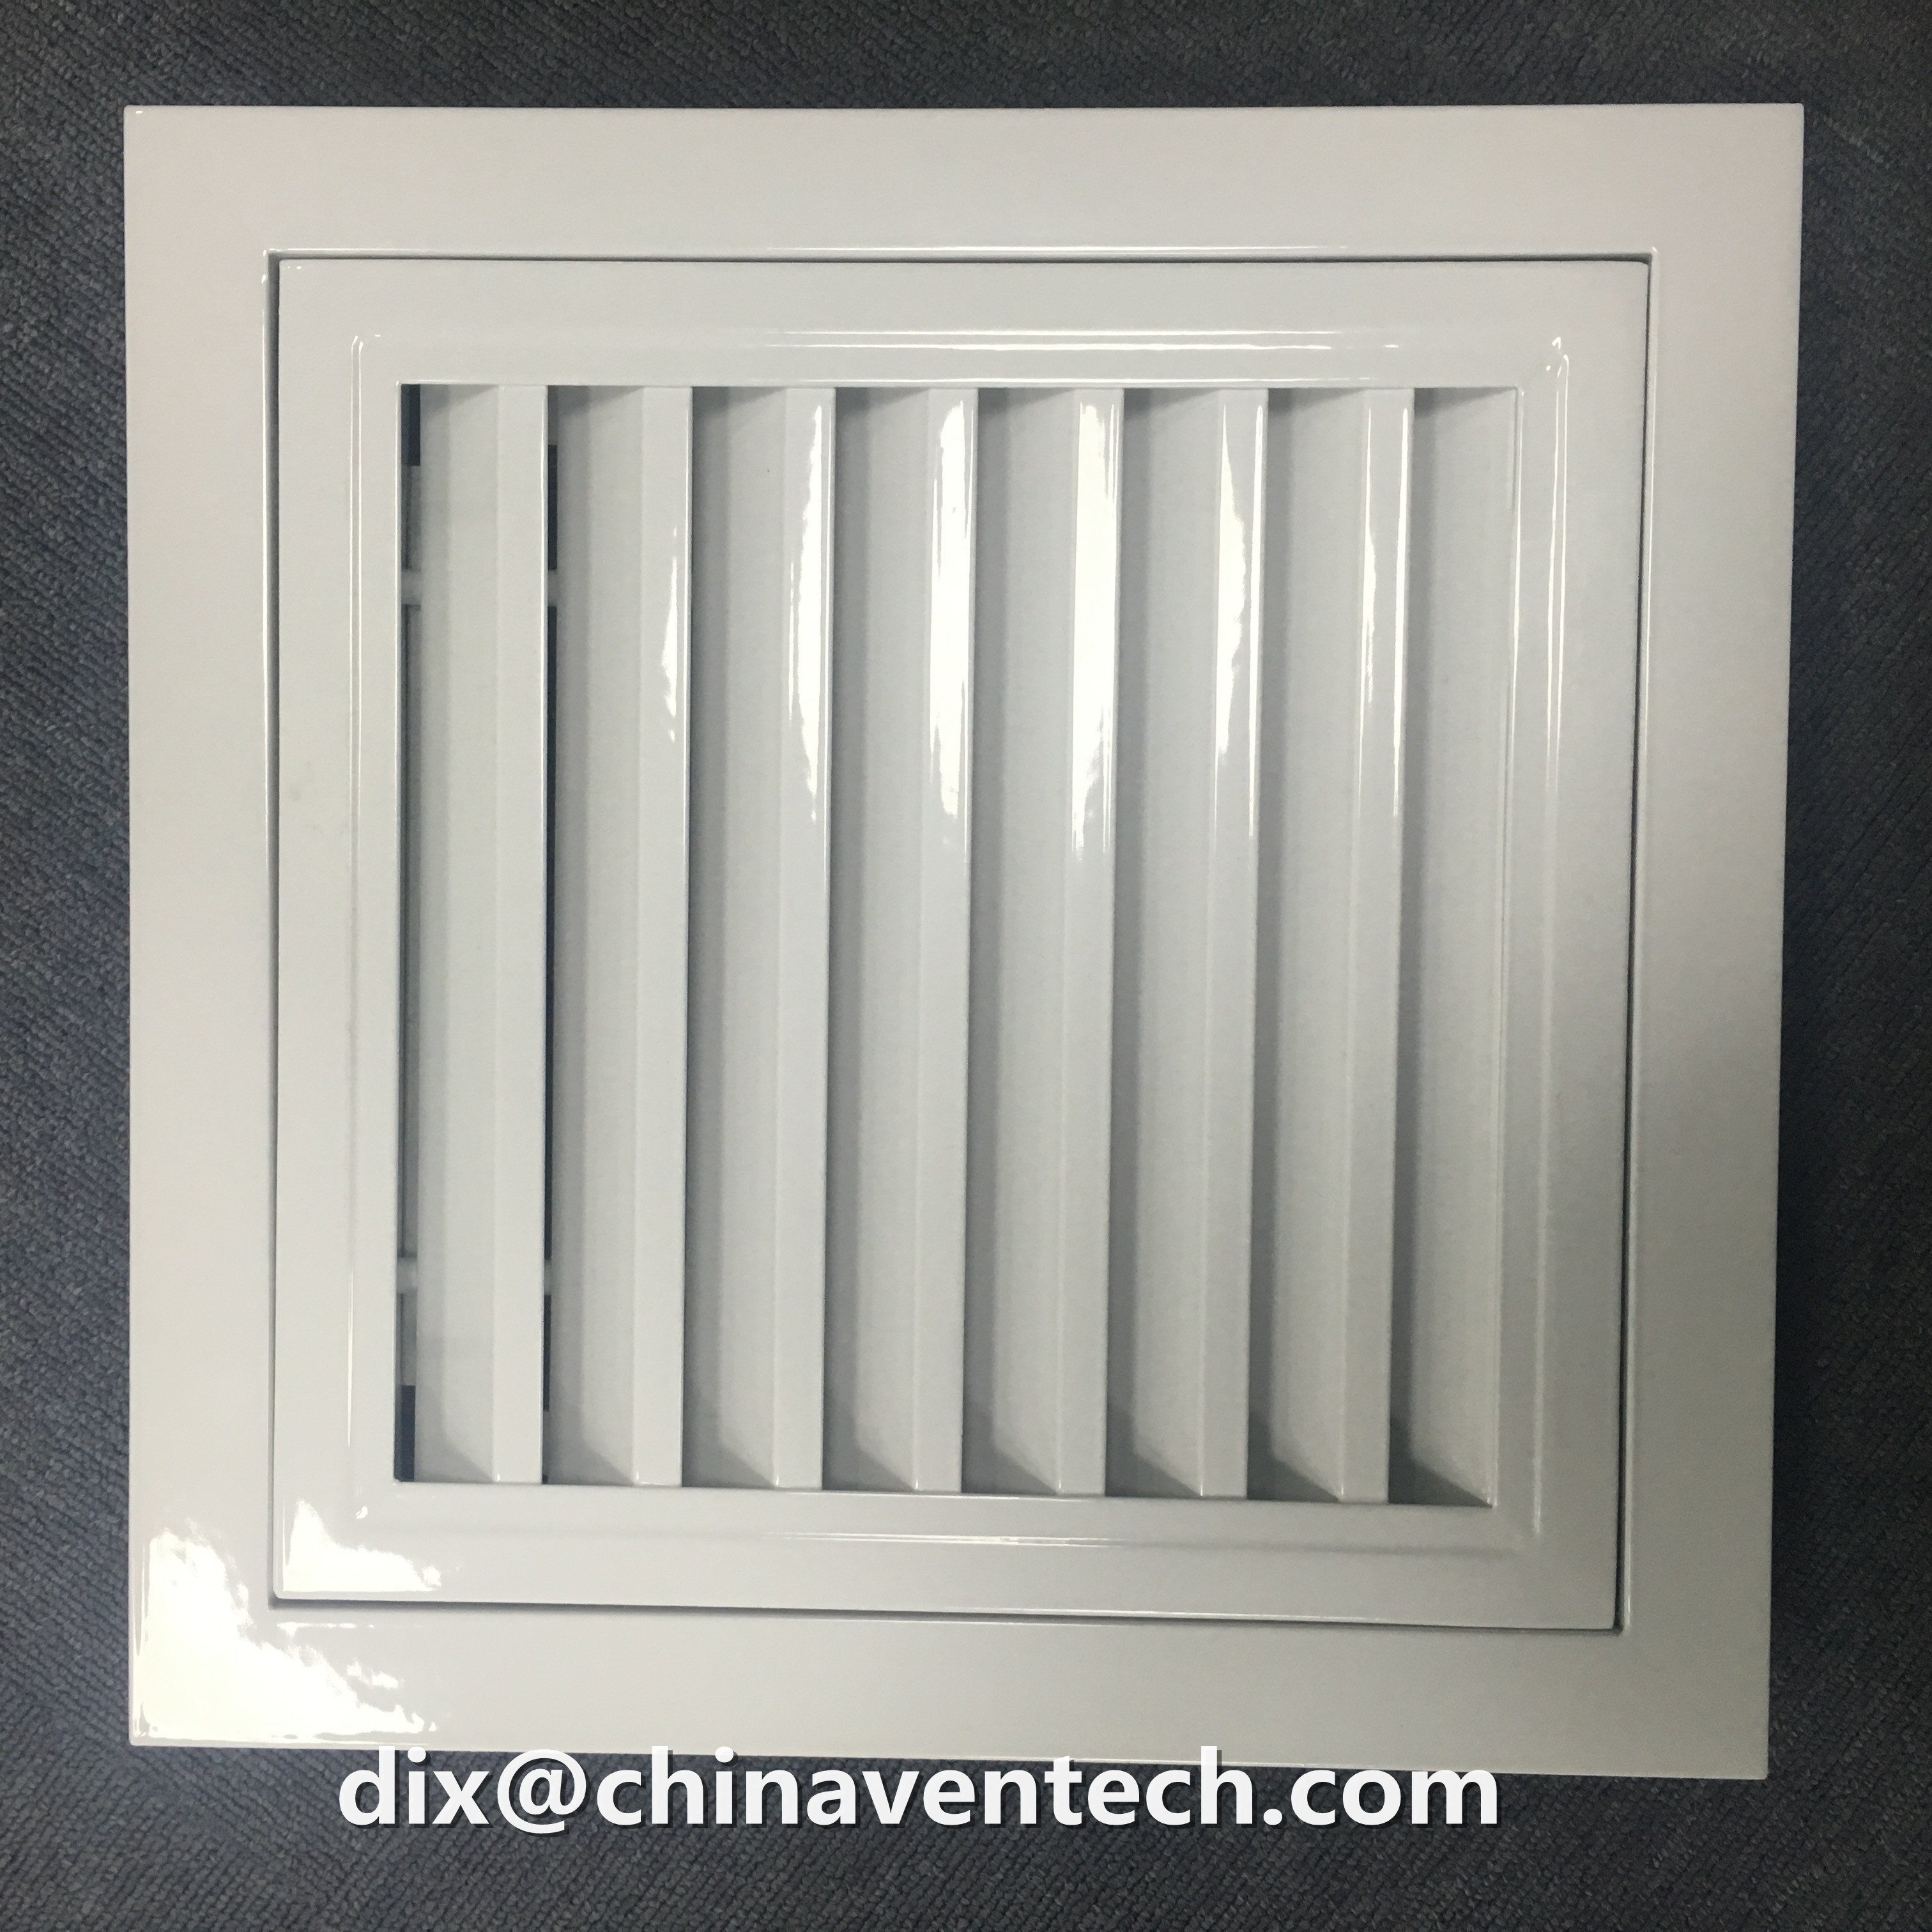 Hvac air conditioning exhaust air ceiling air vent removable cores hinged type filter return grille